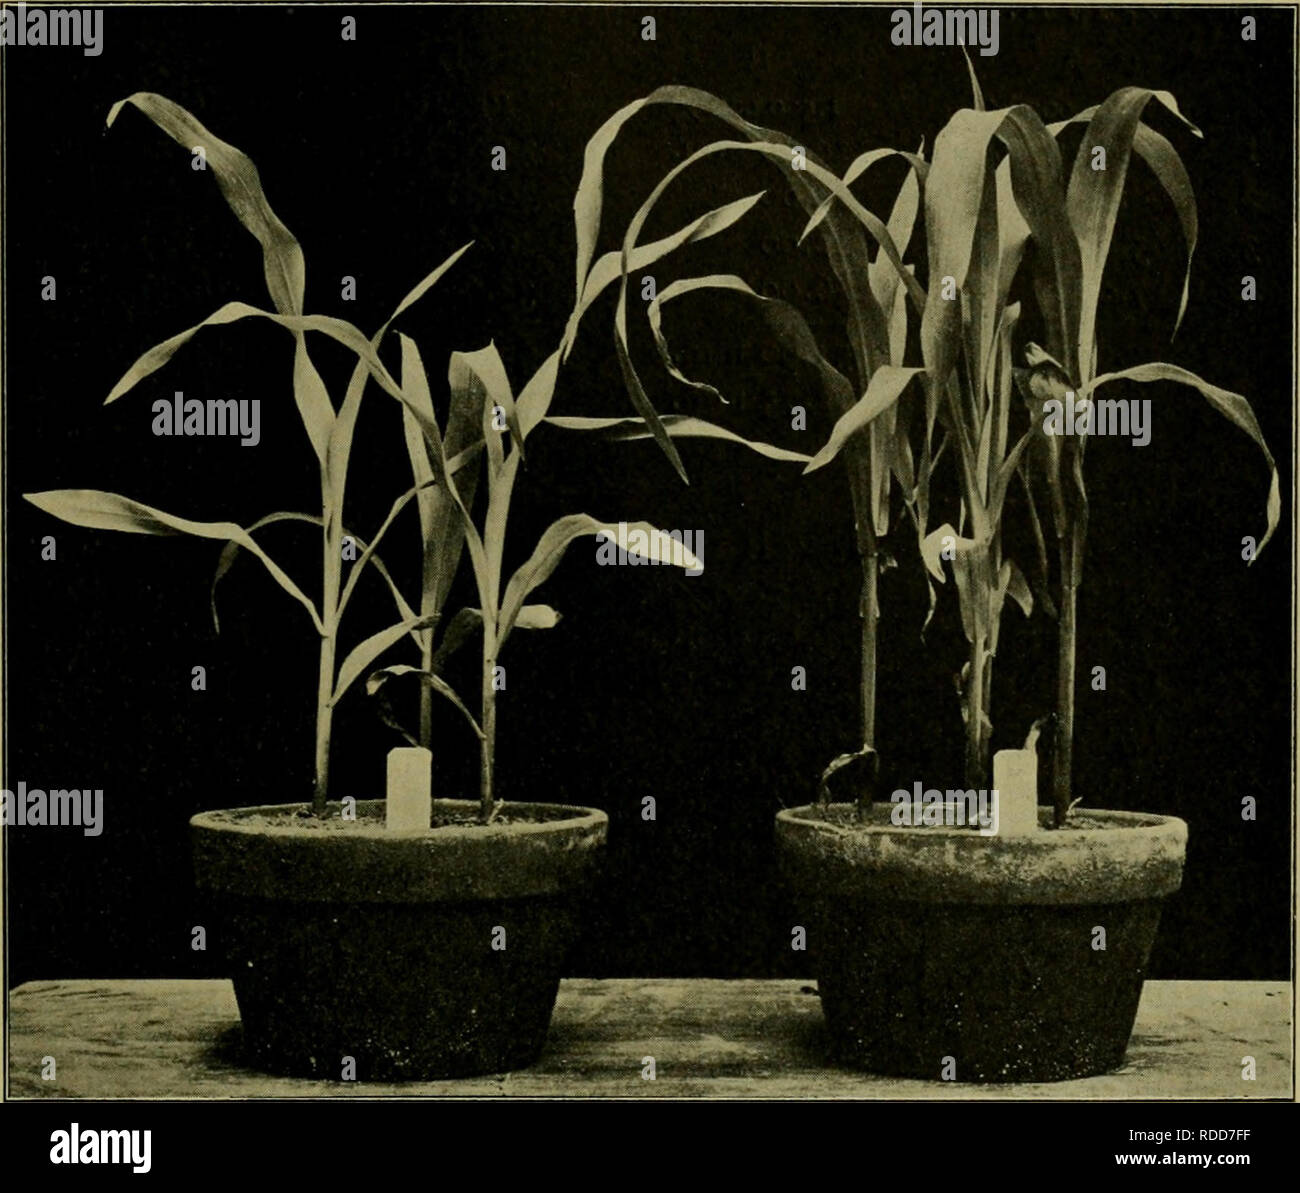 . Effects of the rays of radium on plants. Plants. EFFECTS OF EXPOSING SEEDS 117. Fig. 15. Experiment 26. Retardation of Growth of Zea Mays by Exposing Grains, before Planting, to a Sealed Glass Tube of Radio-Tellurium. Duration of Exposure, 24 Hours. ^a 3 J II, 10 A.M. A B D E 1,800,000 X 1,500,000 X Ra. Tel. Control I 0.00 mm. 13.50 mm 22.50 mm. 29.50 mm 2 6.00 7.00 17.00 28.00 3 0.00 7.00 0.00 23.00 4 4.00 3.00 20.00 22.50 10.00 mm. 30.50 mm. 59.50 mm. 103.00 mm 5.00 mm. 7.62 mm. 19,83 mm. 25.75 mm. Please note that these images are extracted from scanned page images that may have been digi Stock Photo